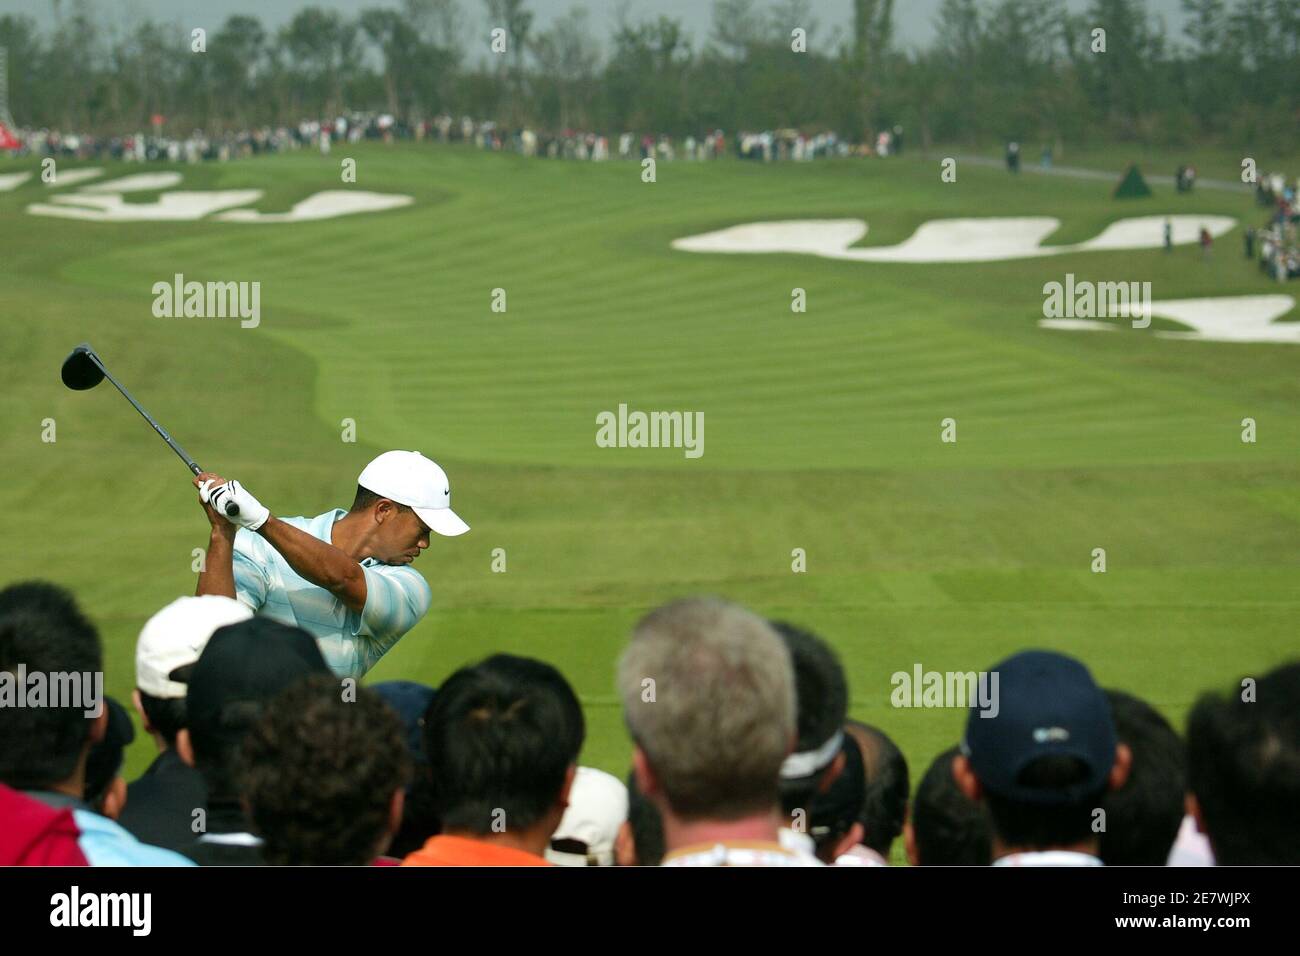 U.S. golfer Tiger Woods takes a shot towards the first hole during the 3rd day for the Champions Tournament in Shanghai, China November 12, 2005. Woods edged ominously to within a shot of leader David Howell at the Champions Tournament after a third-round 67 on Saturday. REUTERS/Aly Song Stock Photo